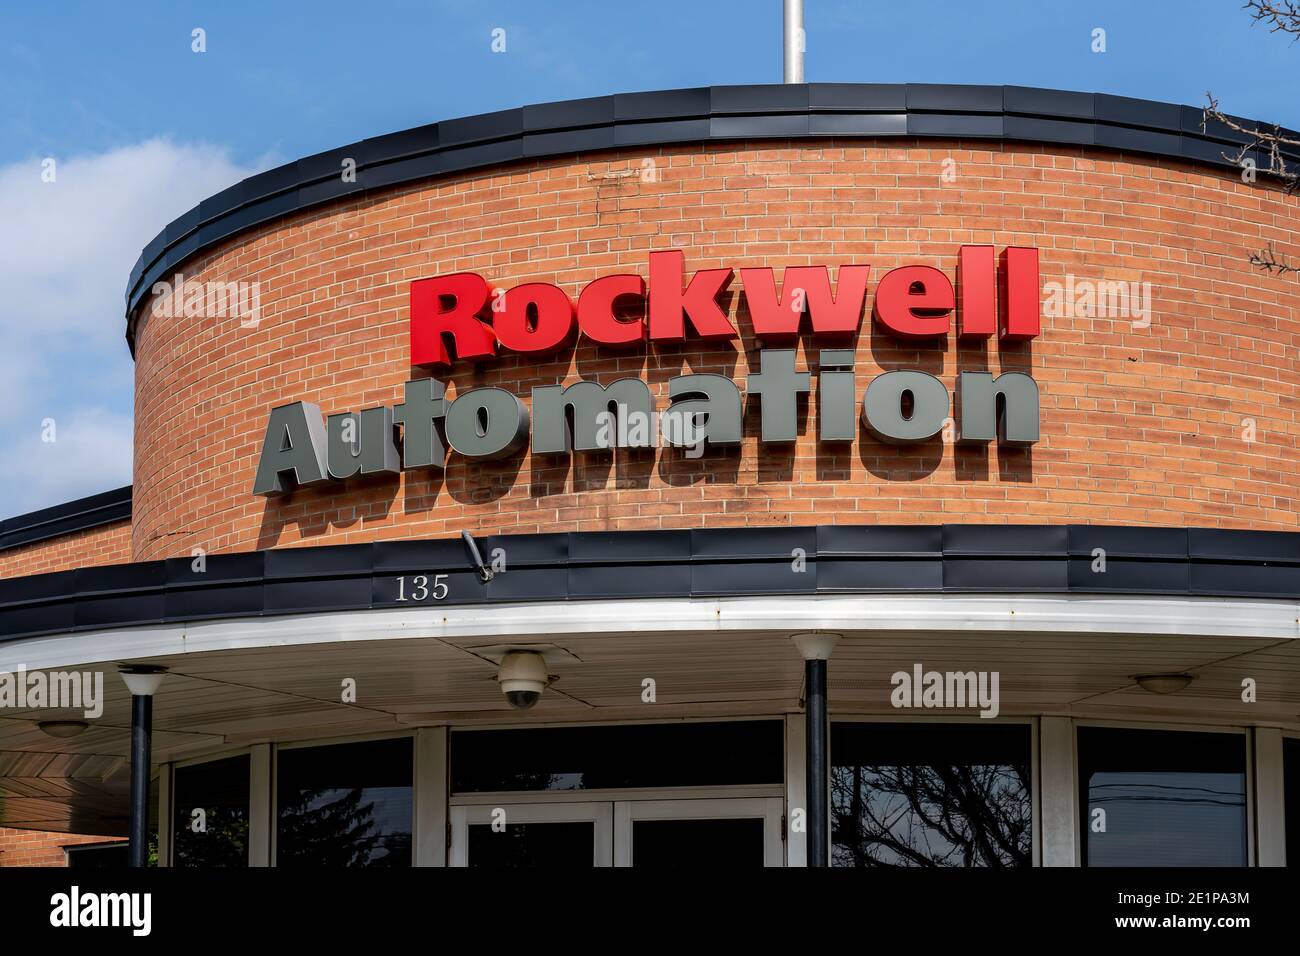 Cambridge, Ontario, Canada - September 27, 2020: Rockwell Automation sign is seen in Cambridge, On, Canada Stock Photo